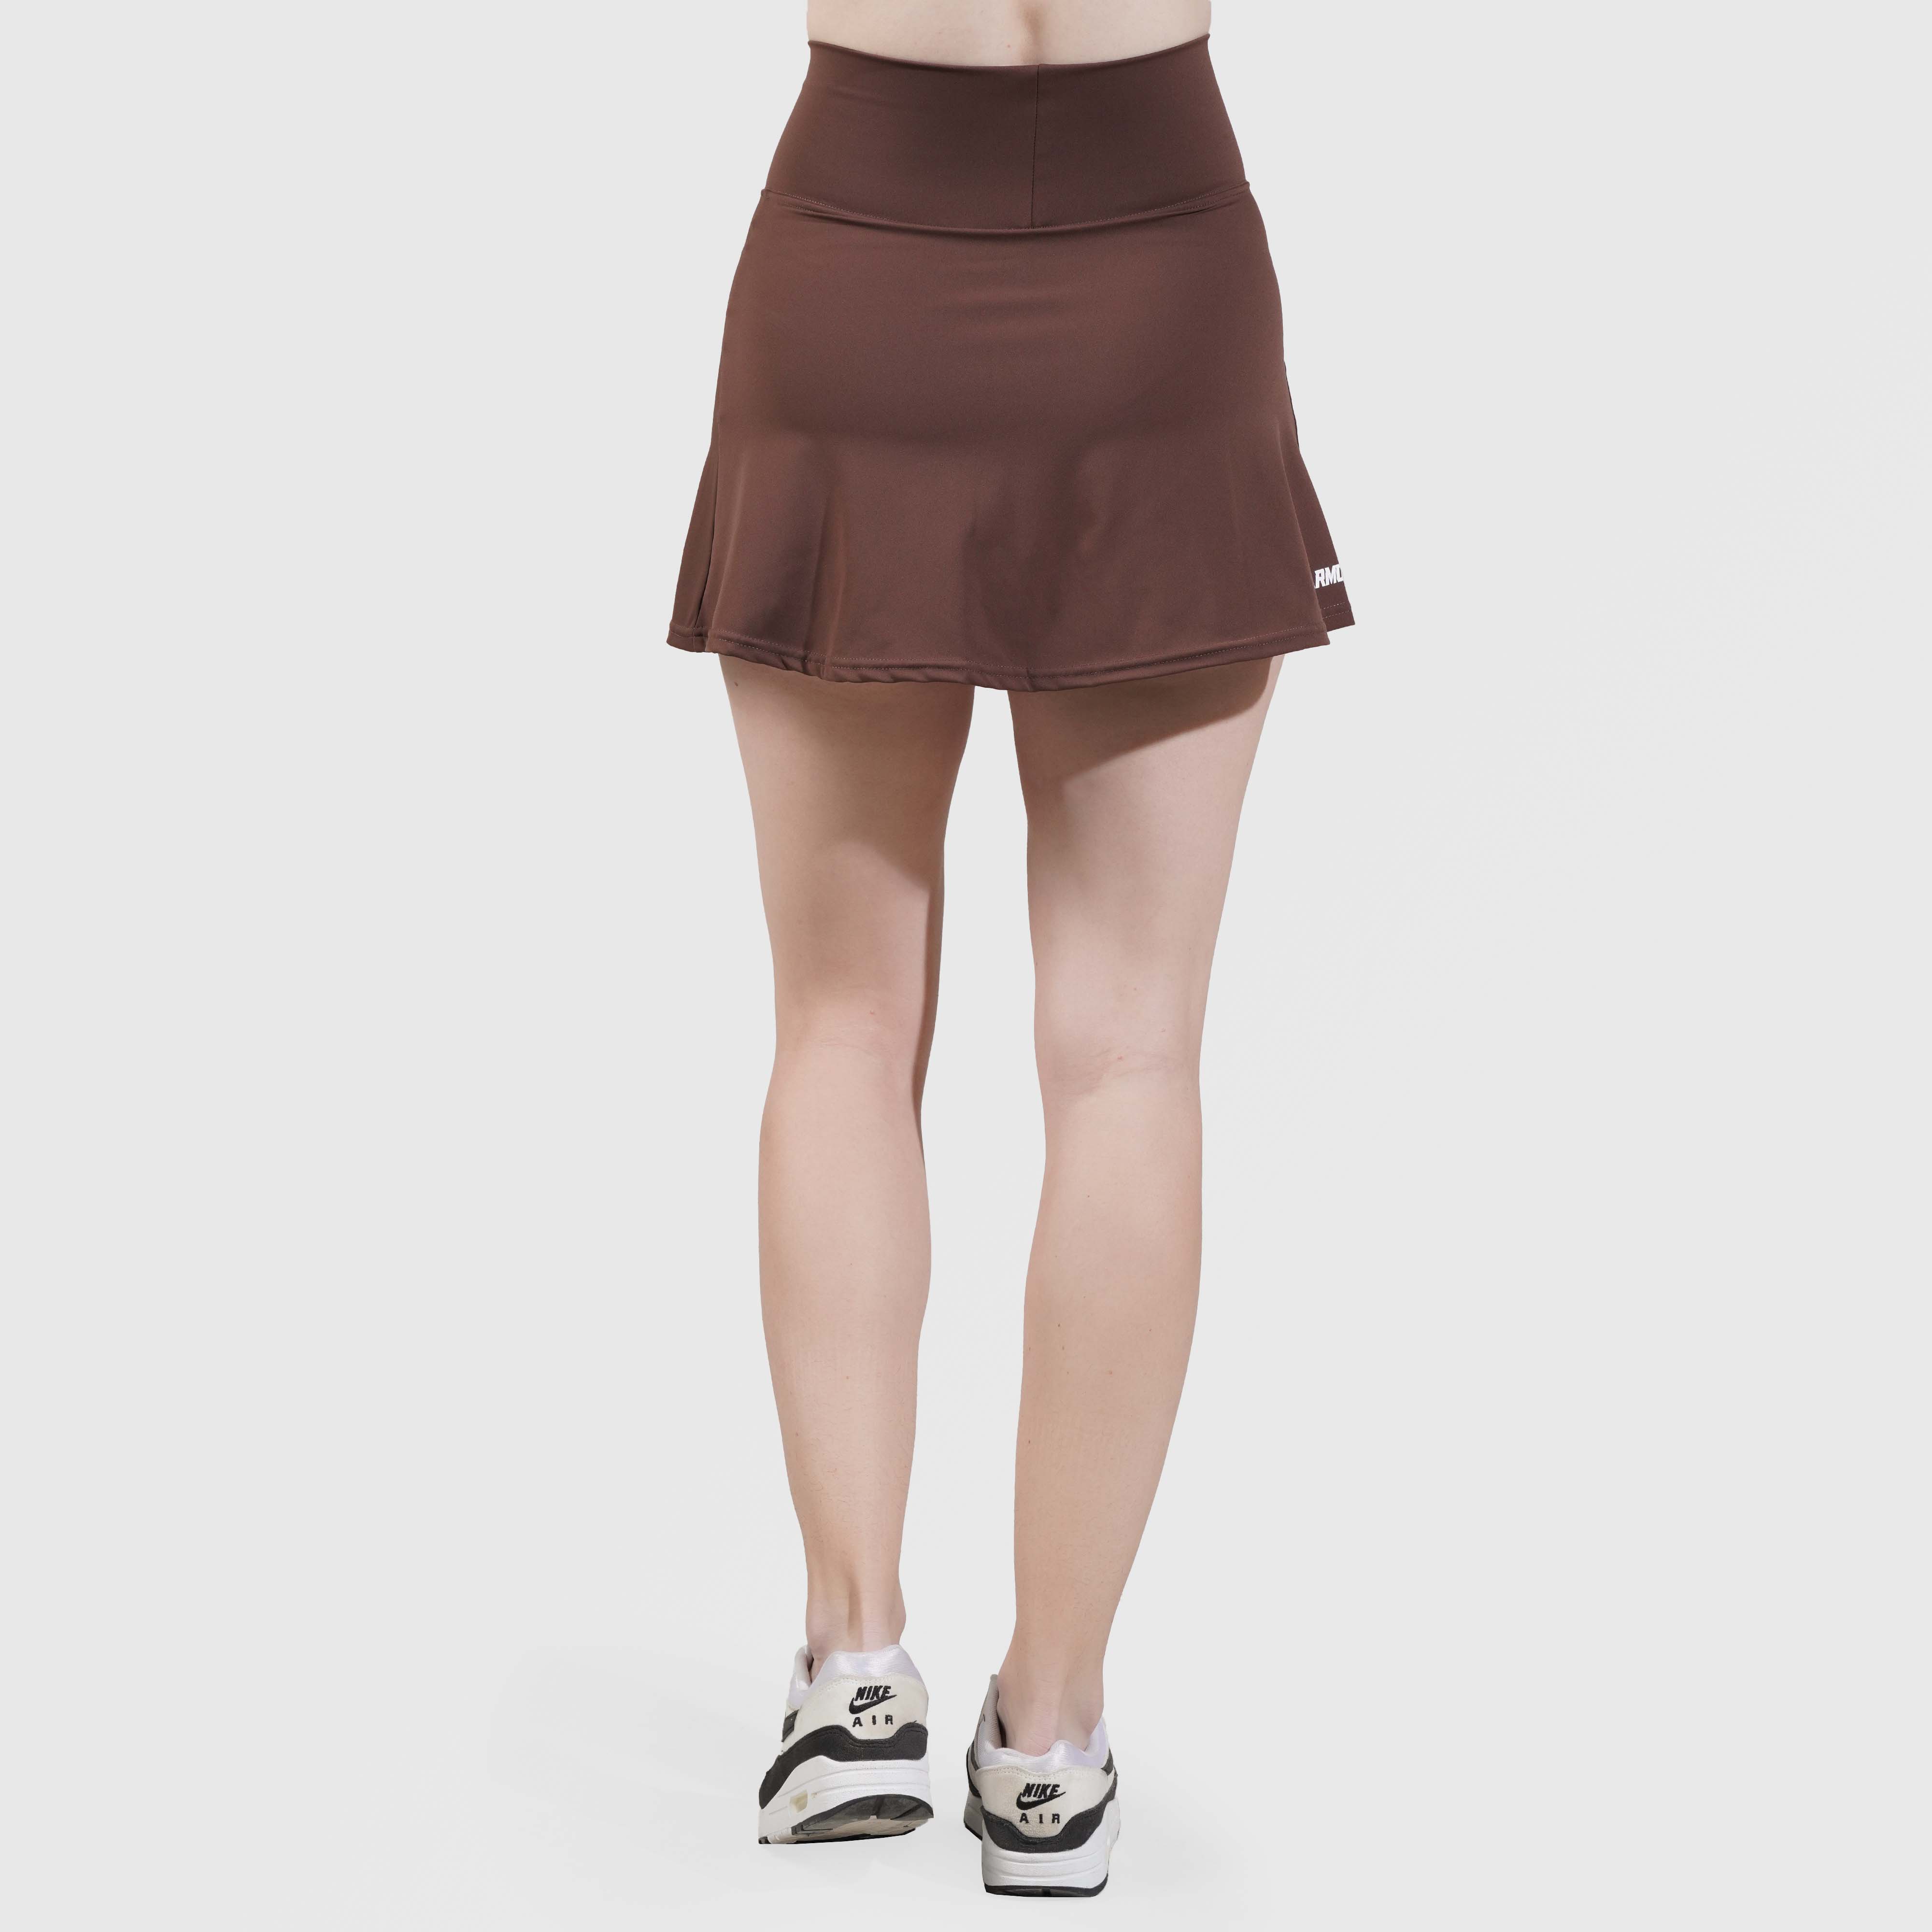 Pace Skirt (Brown)